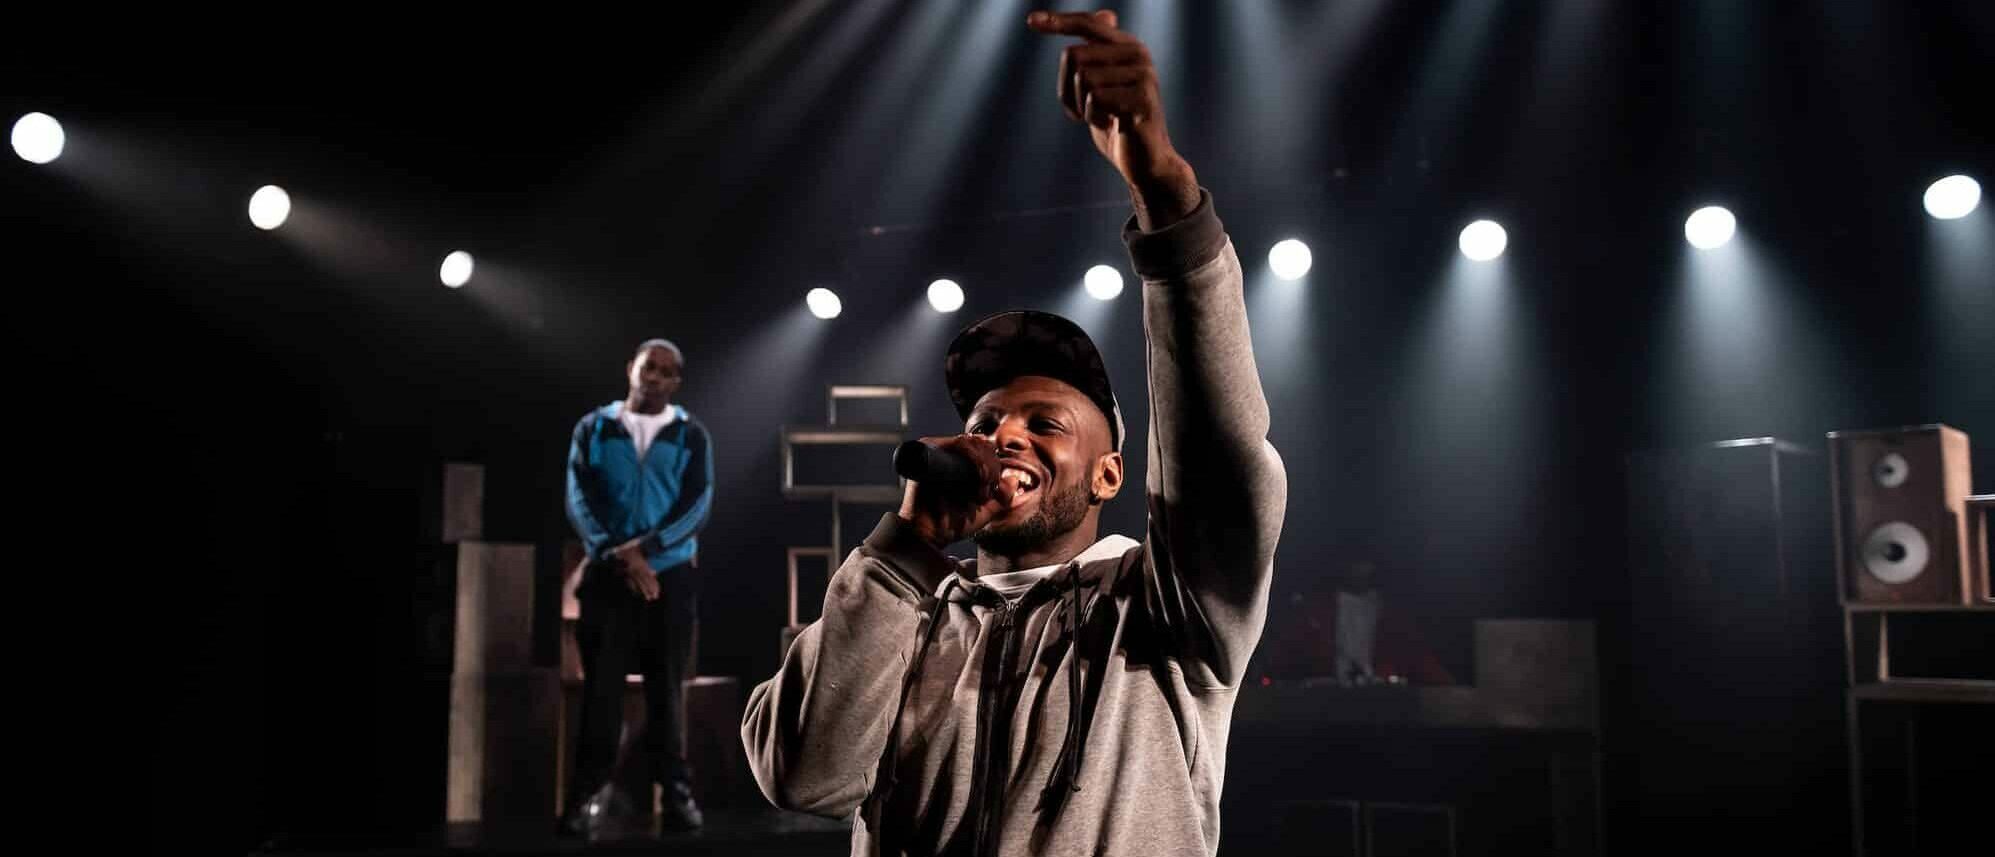 A performer sings into the mic to the background of a dim-lit stage, smiling, holding his hand up.